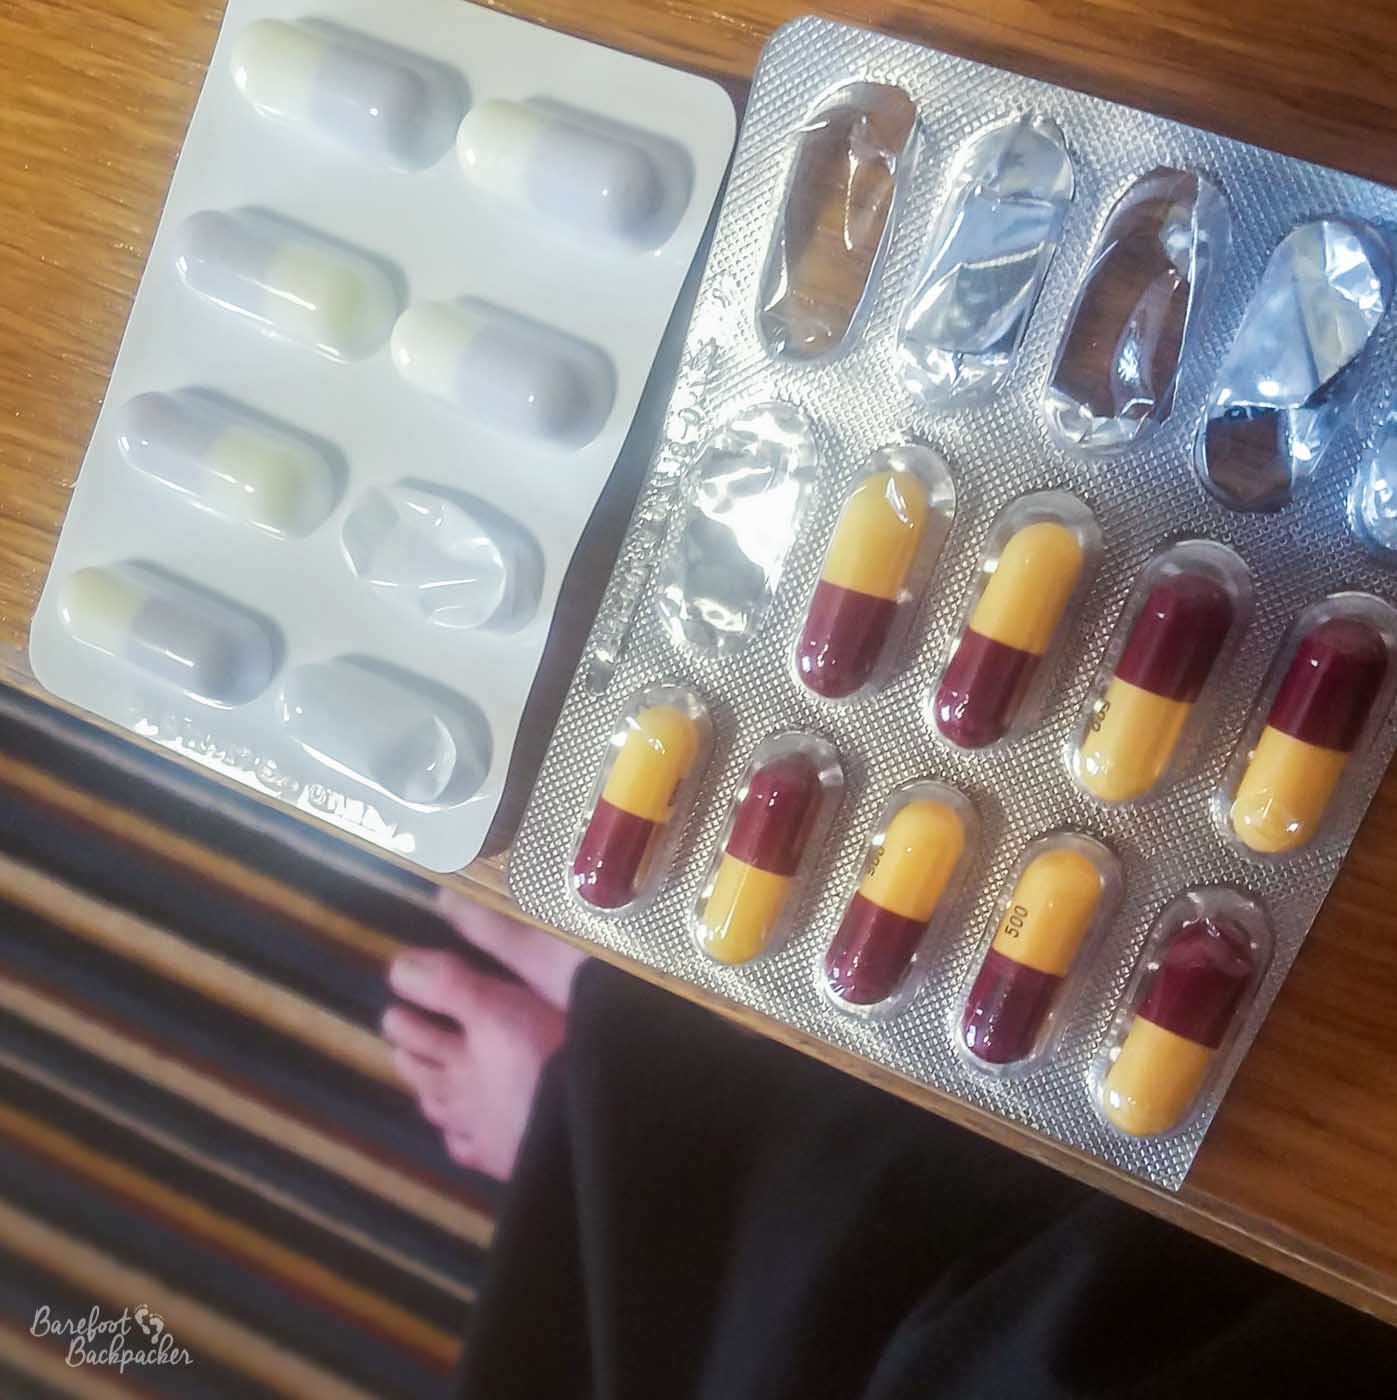 On a table in a hotel room are two packets of pills. The pills are quite big, and each half of the pill is a different colour. Some of the pills have been taken already, evidenced by empty and squashed sections of the pill packet.